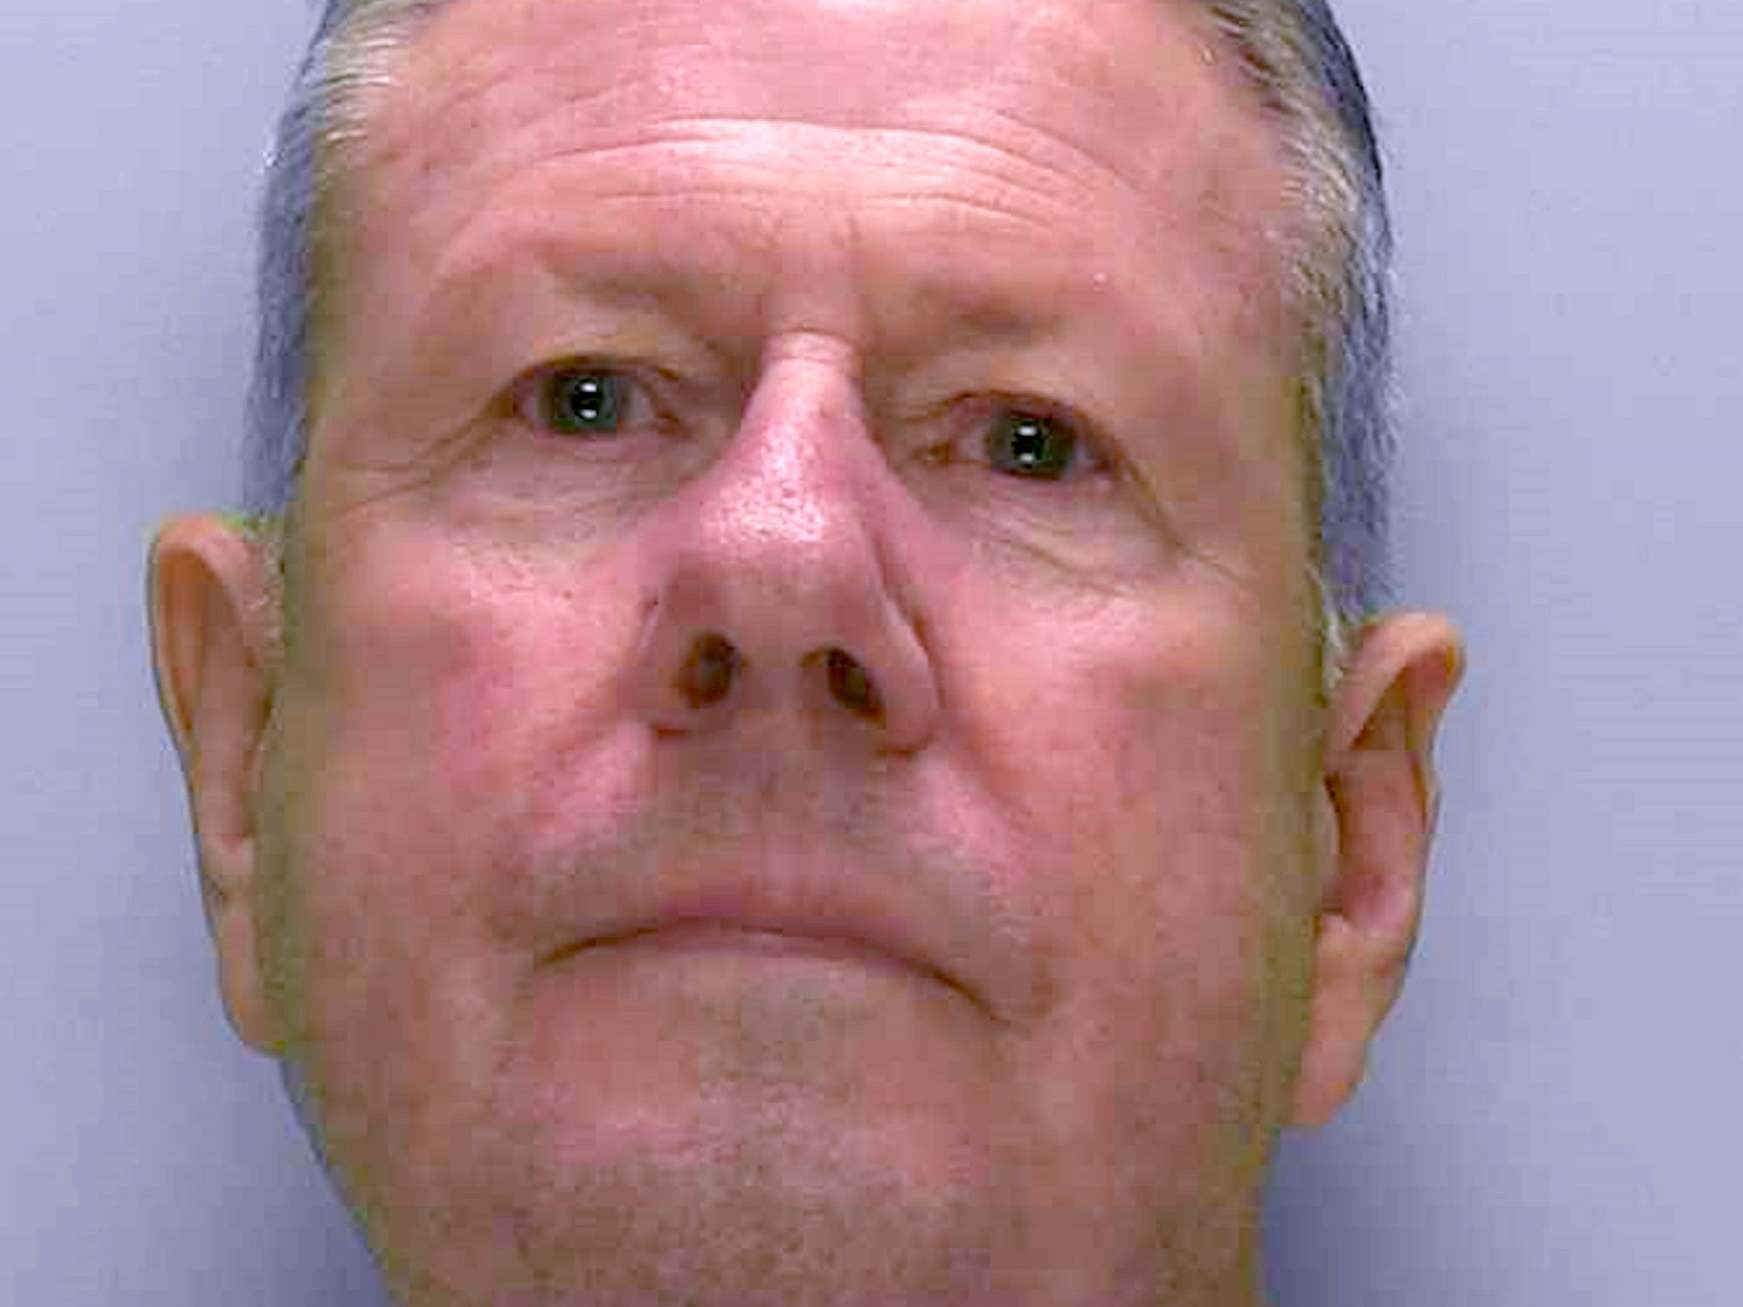 Kenneth Francis, 72, was jailed for 12 years for sexually abusing four boys while working at a school in Chelmsford in the 1970s.